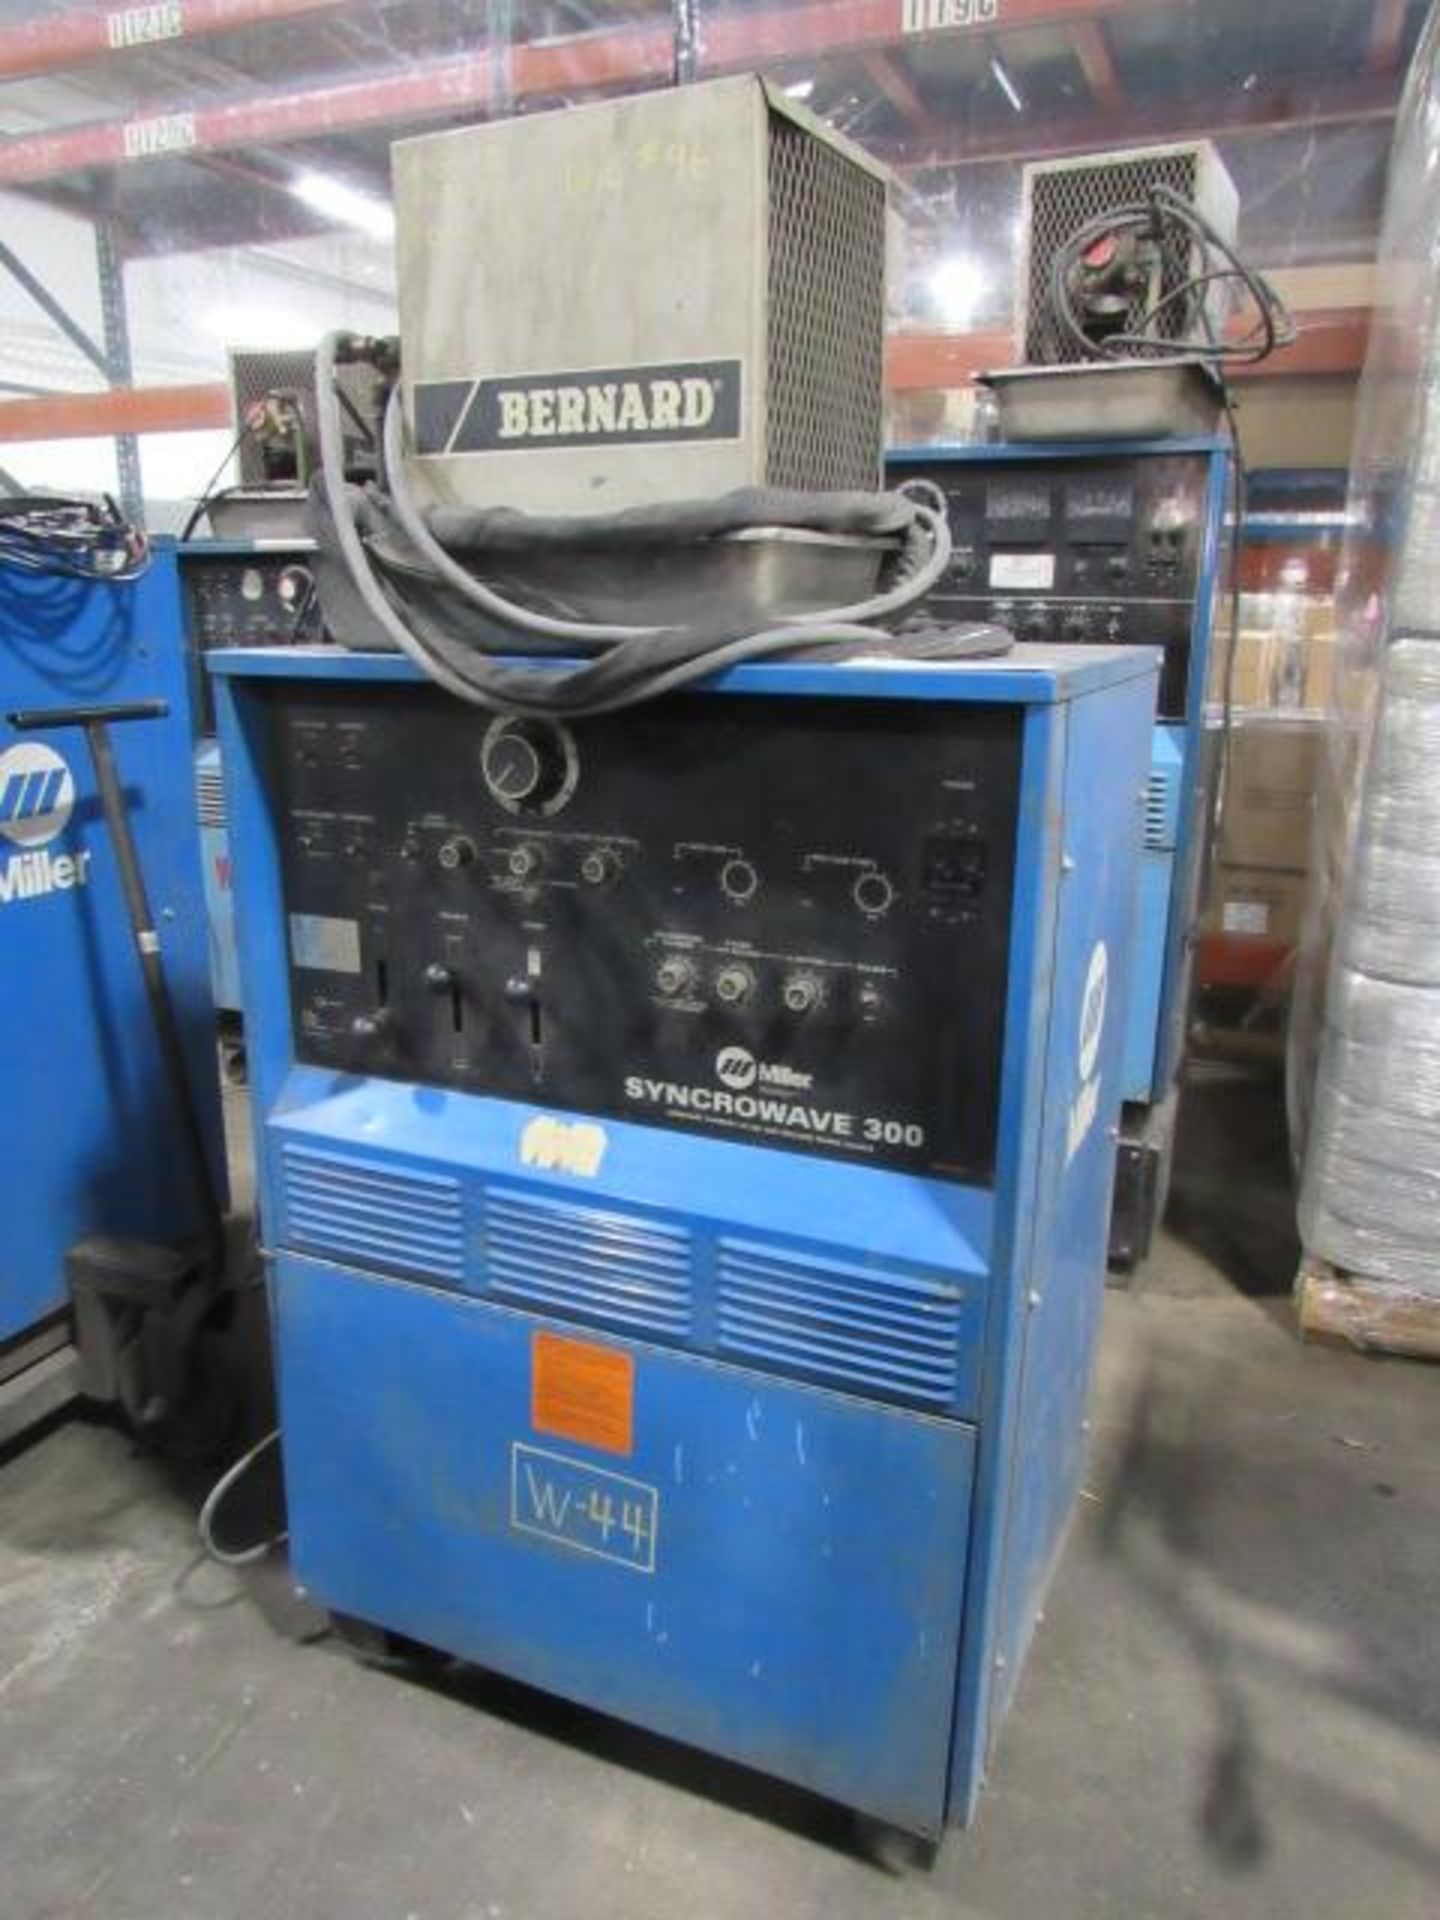 Miller Syncrowave 300 Power Source with Bernard Chiller, sn:JH305167